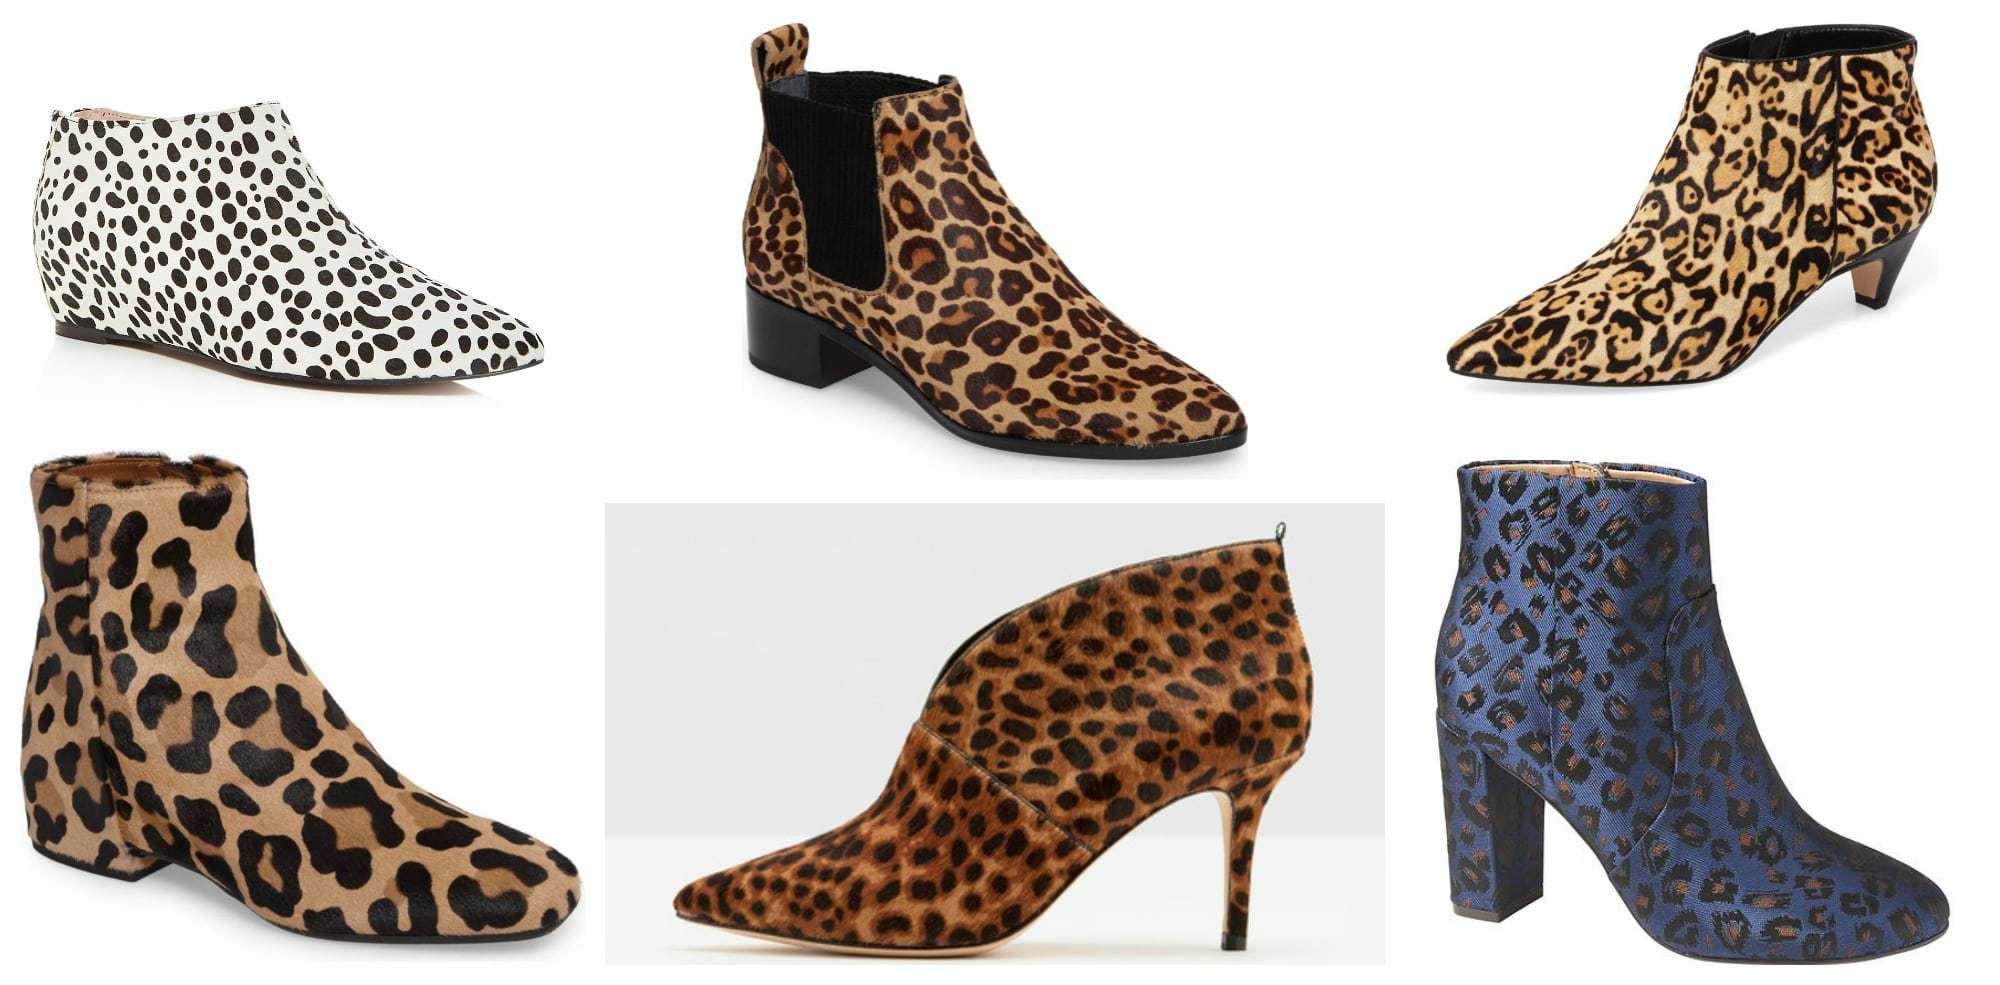 the best leopard print shoes for fall featured by popular DC petite fashion blogger, Wardrobe Oxygen: ankle boots